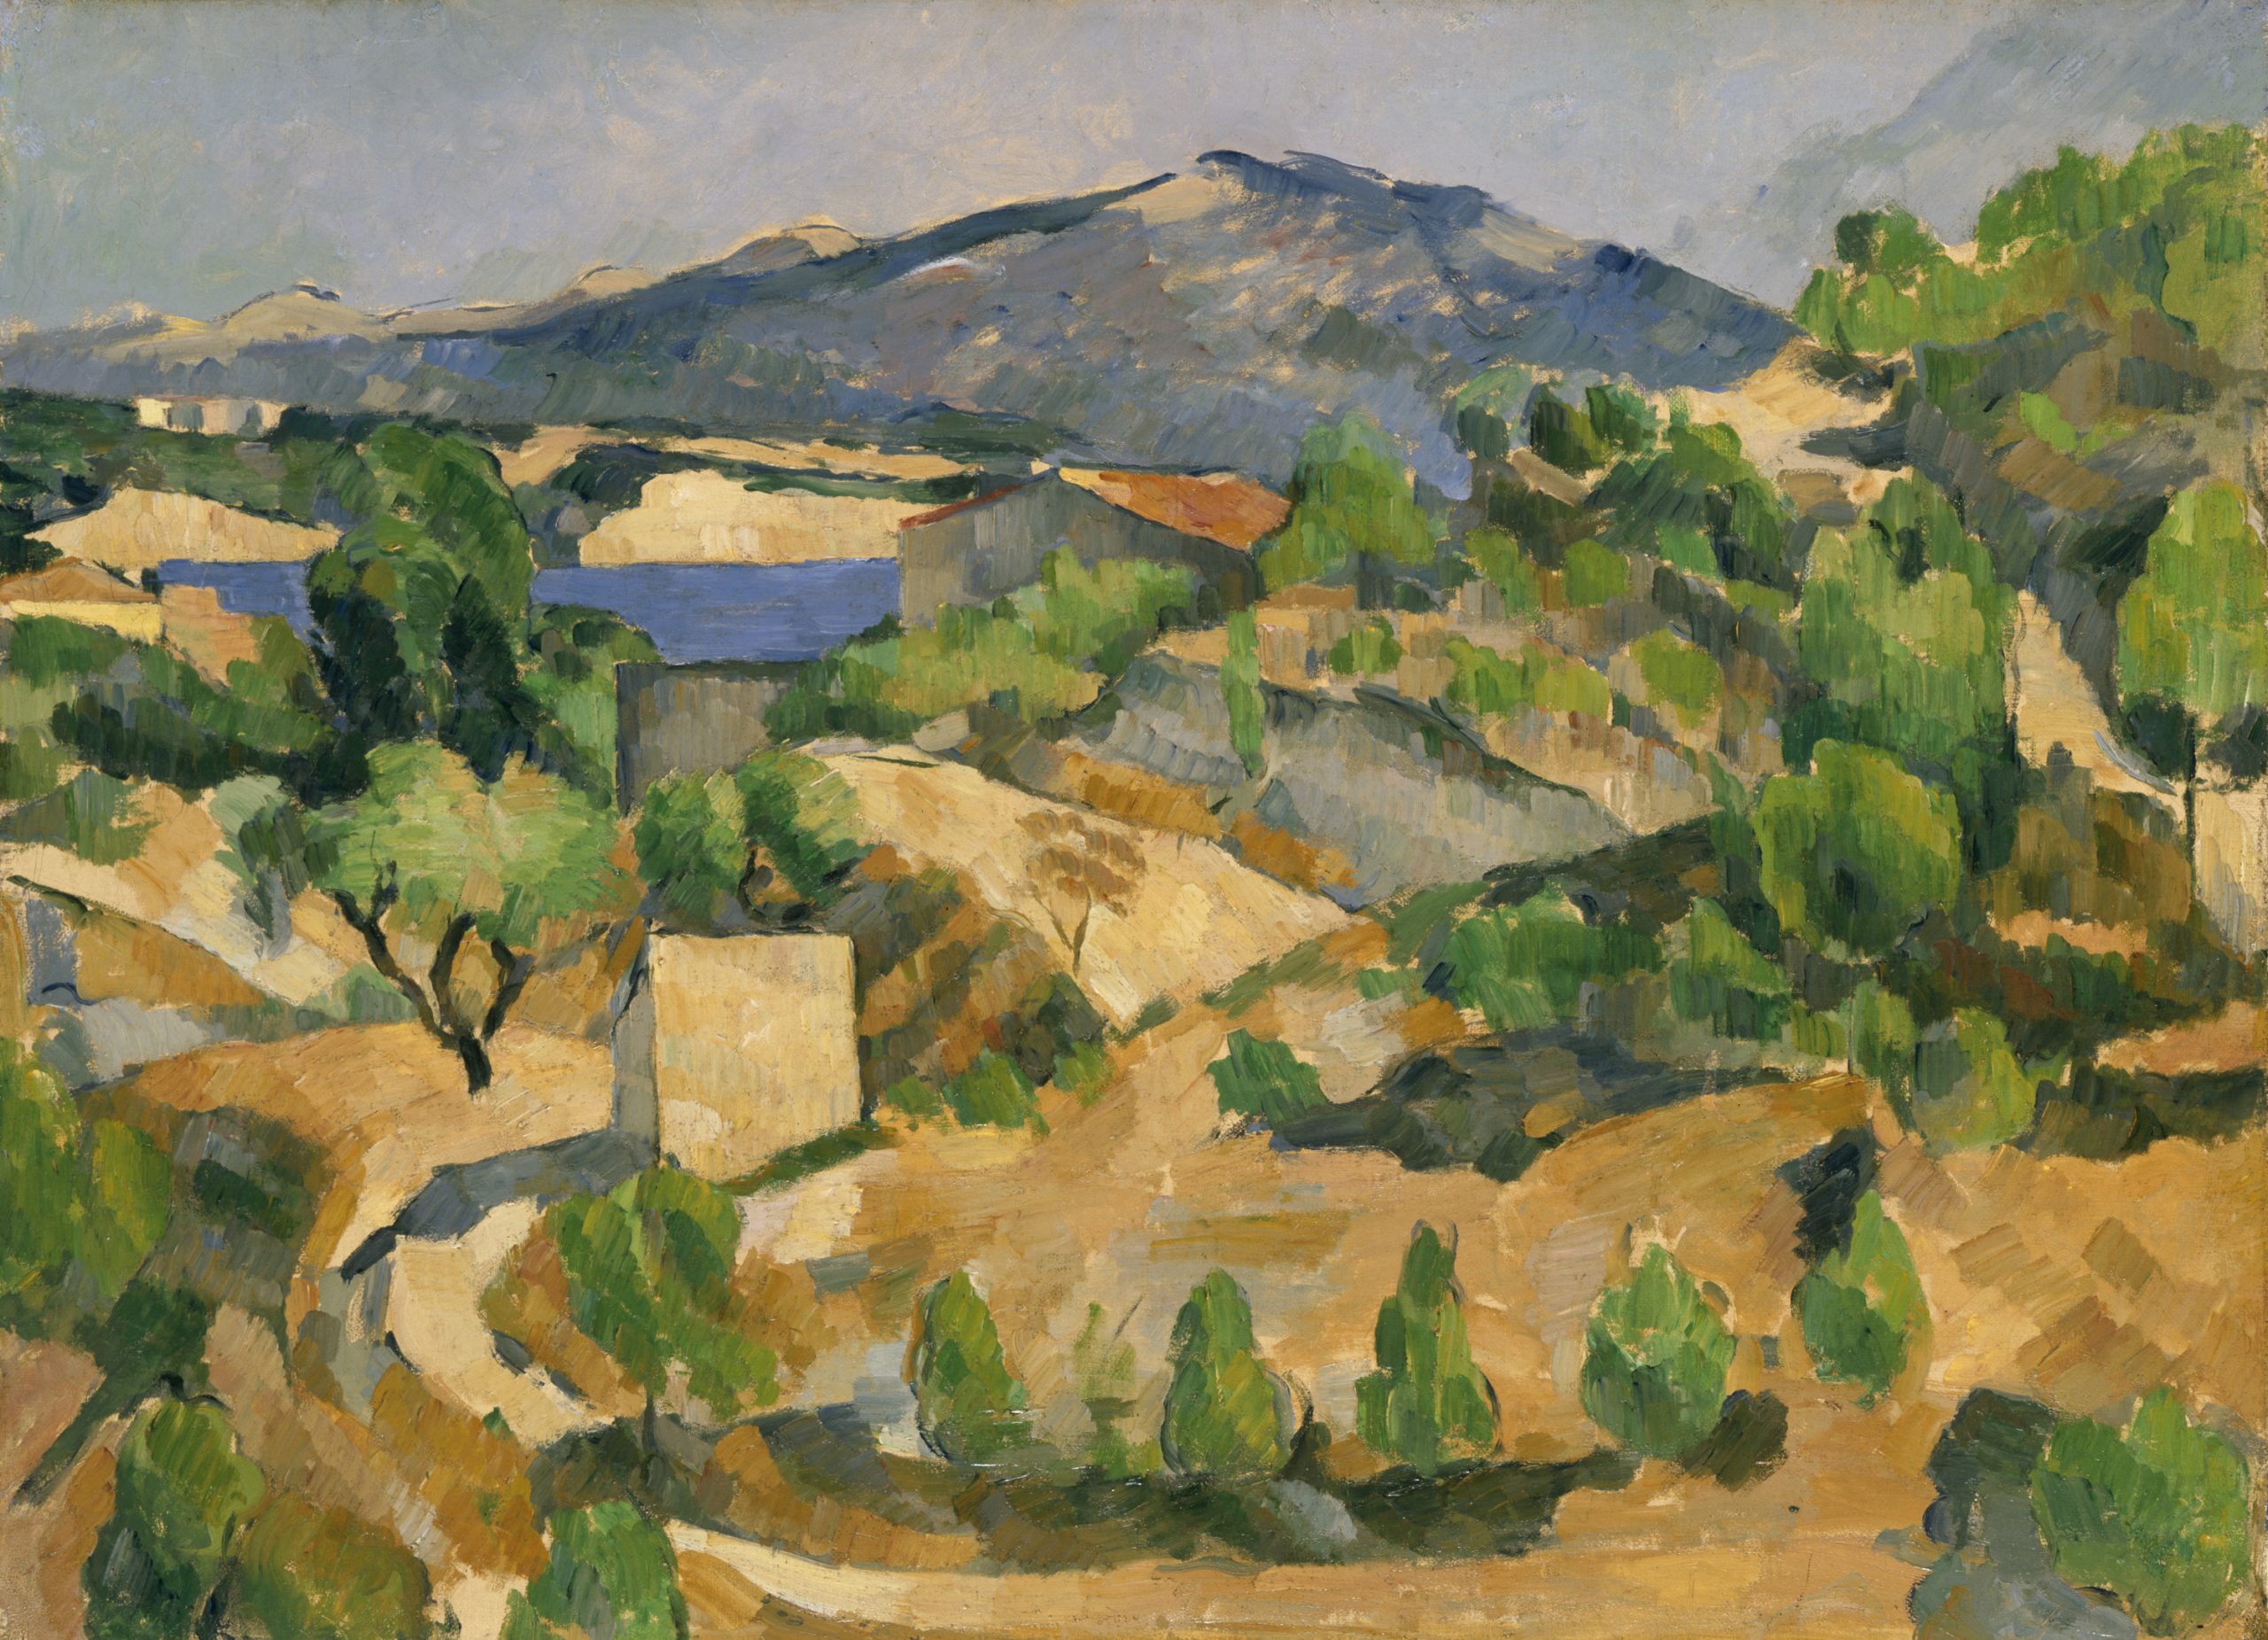 Paul Cezanne - The François Zola Dam (Mountains in Provence) 1877-8. Amgueddfa Cymru – National Museum of Wales